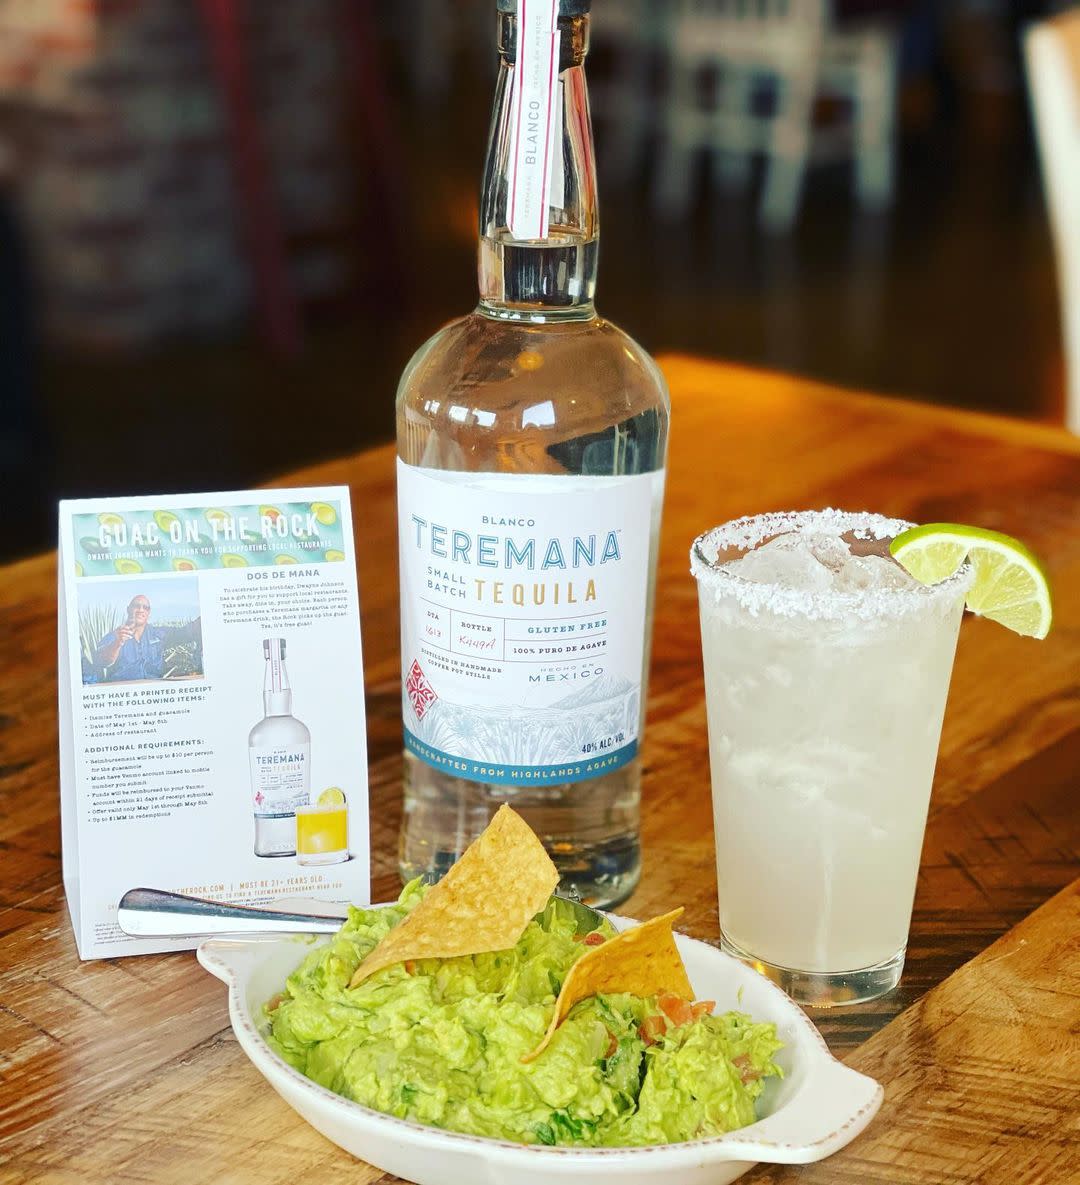 Chips, guacamole and tequila from El Camino Kitchen